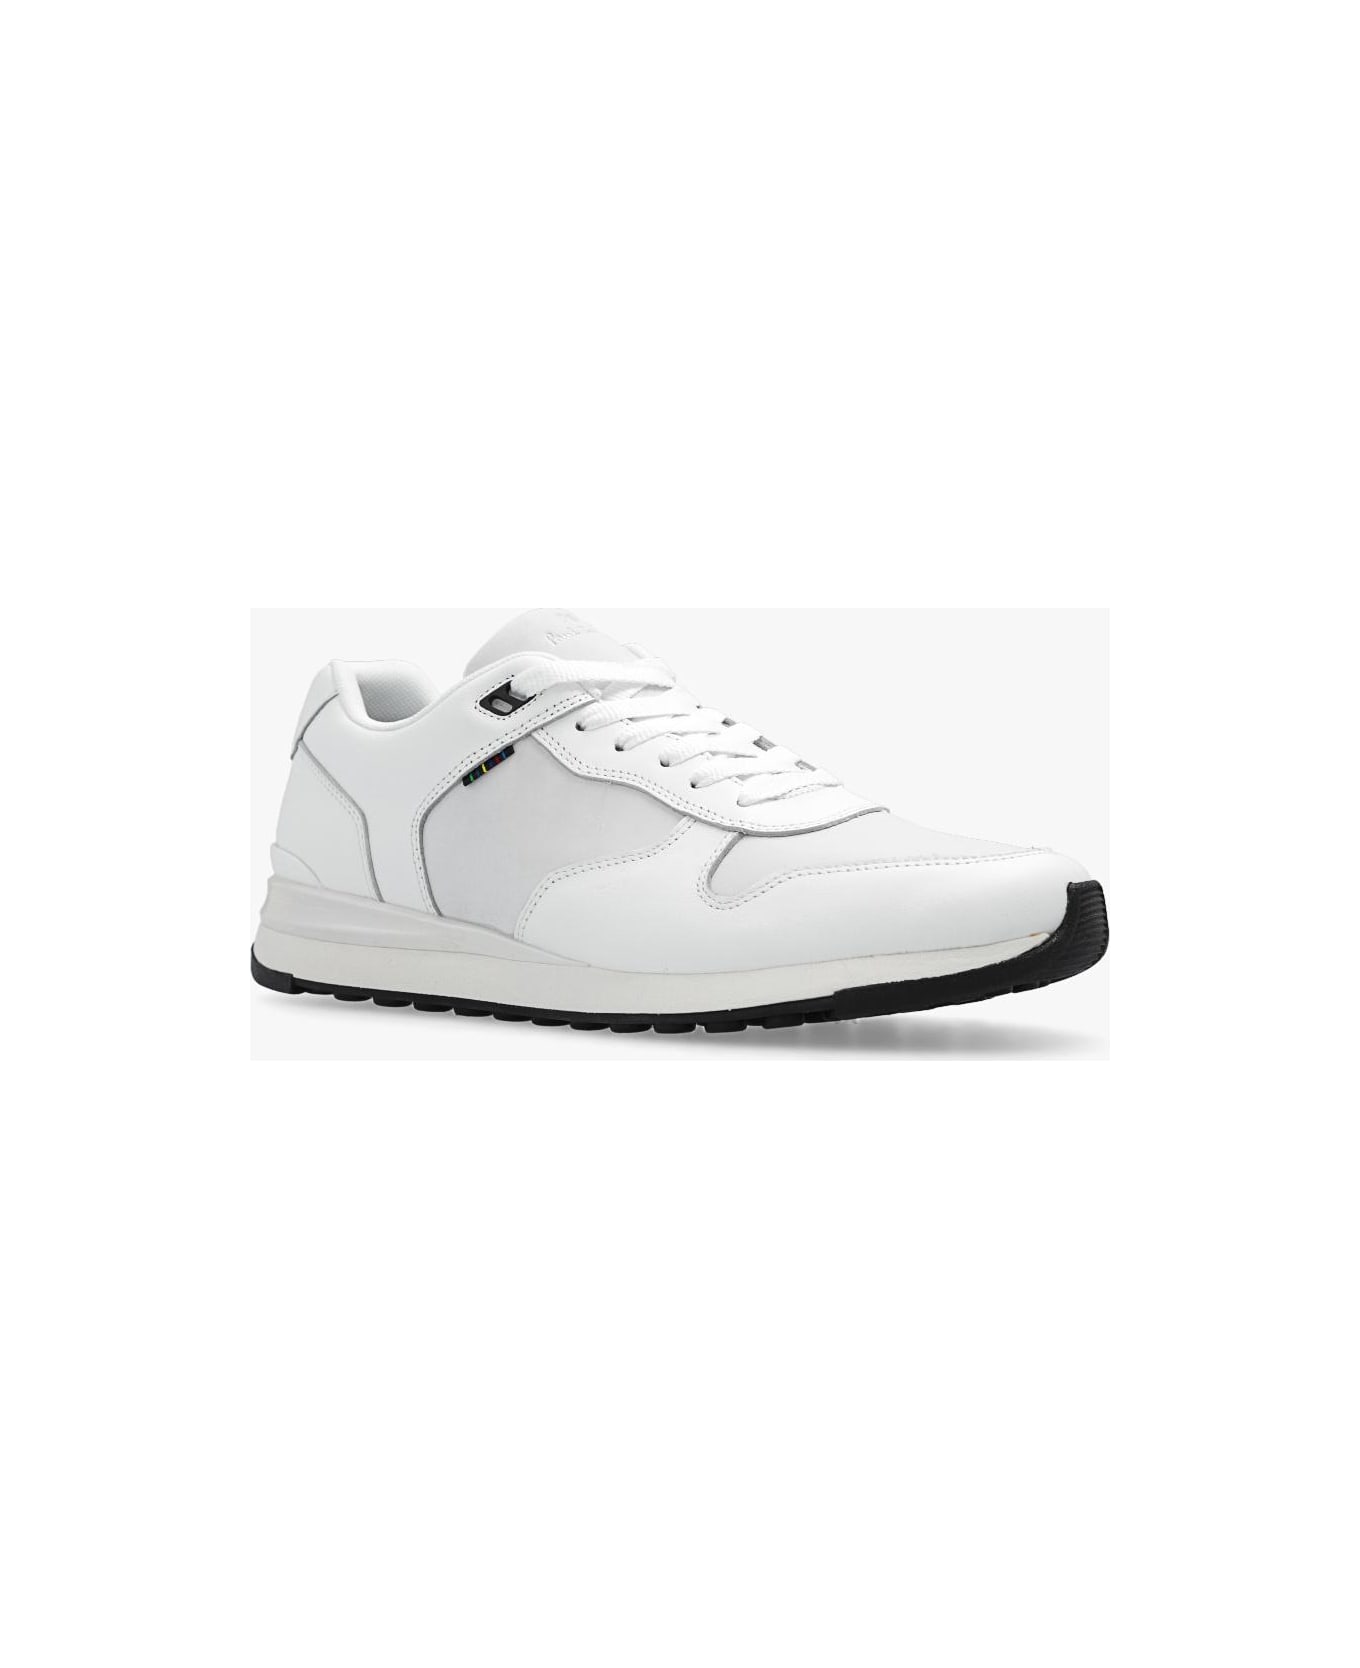 Paul Smith 'ware' Sneakers - White